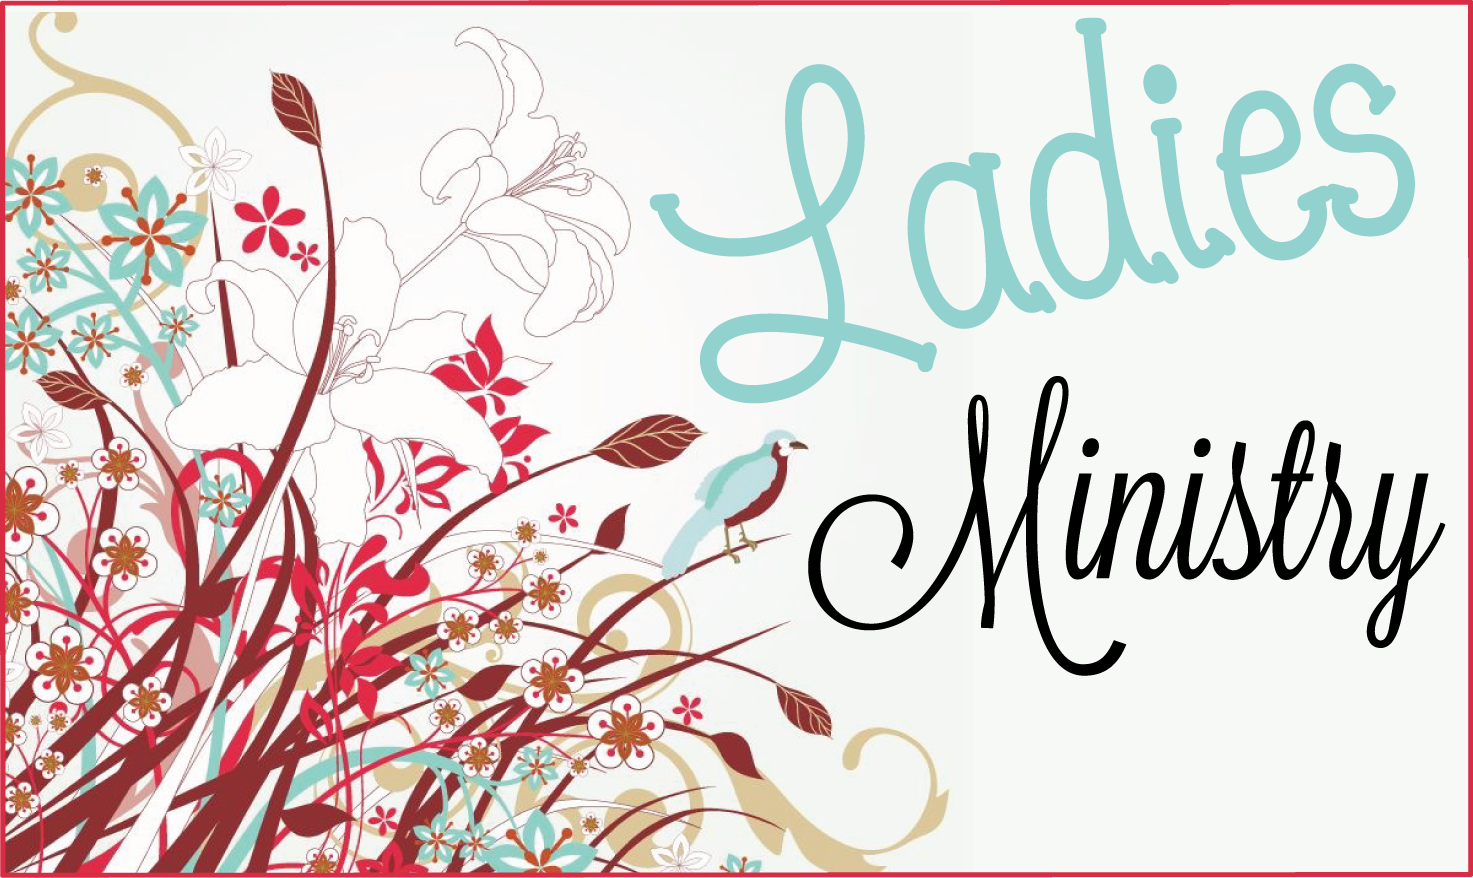 Our Ladies Ministry